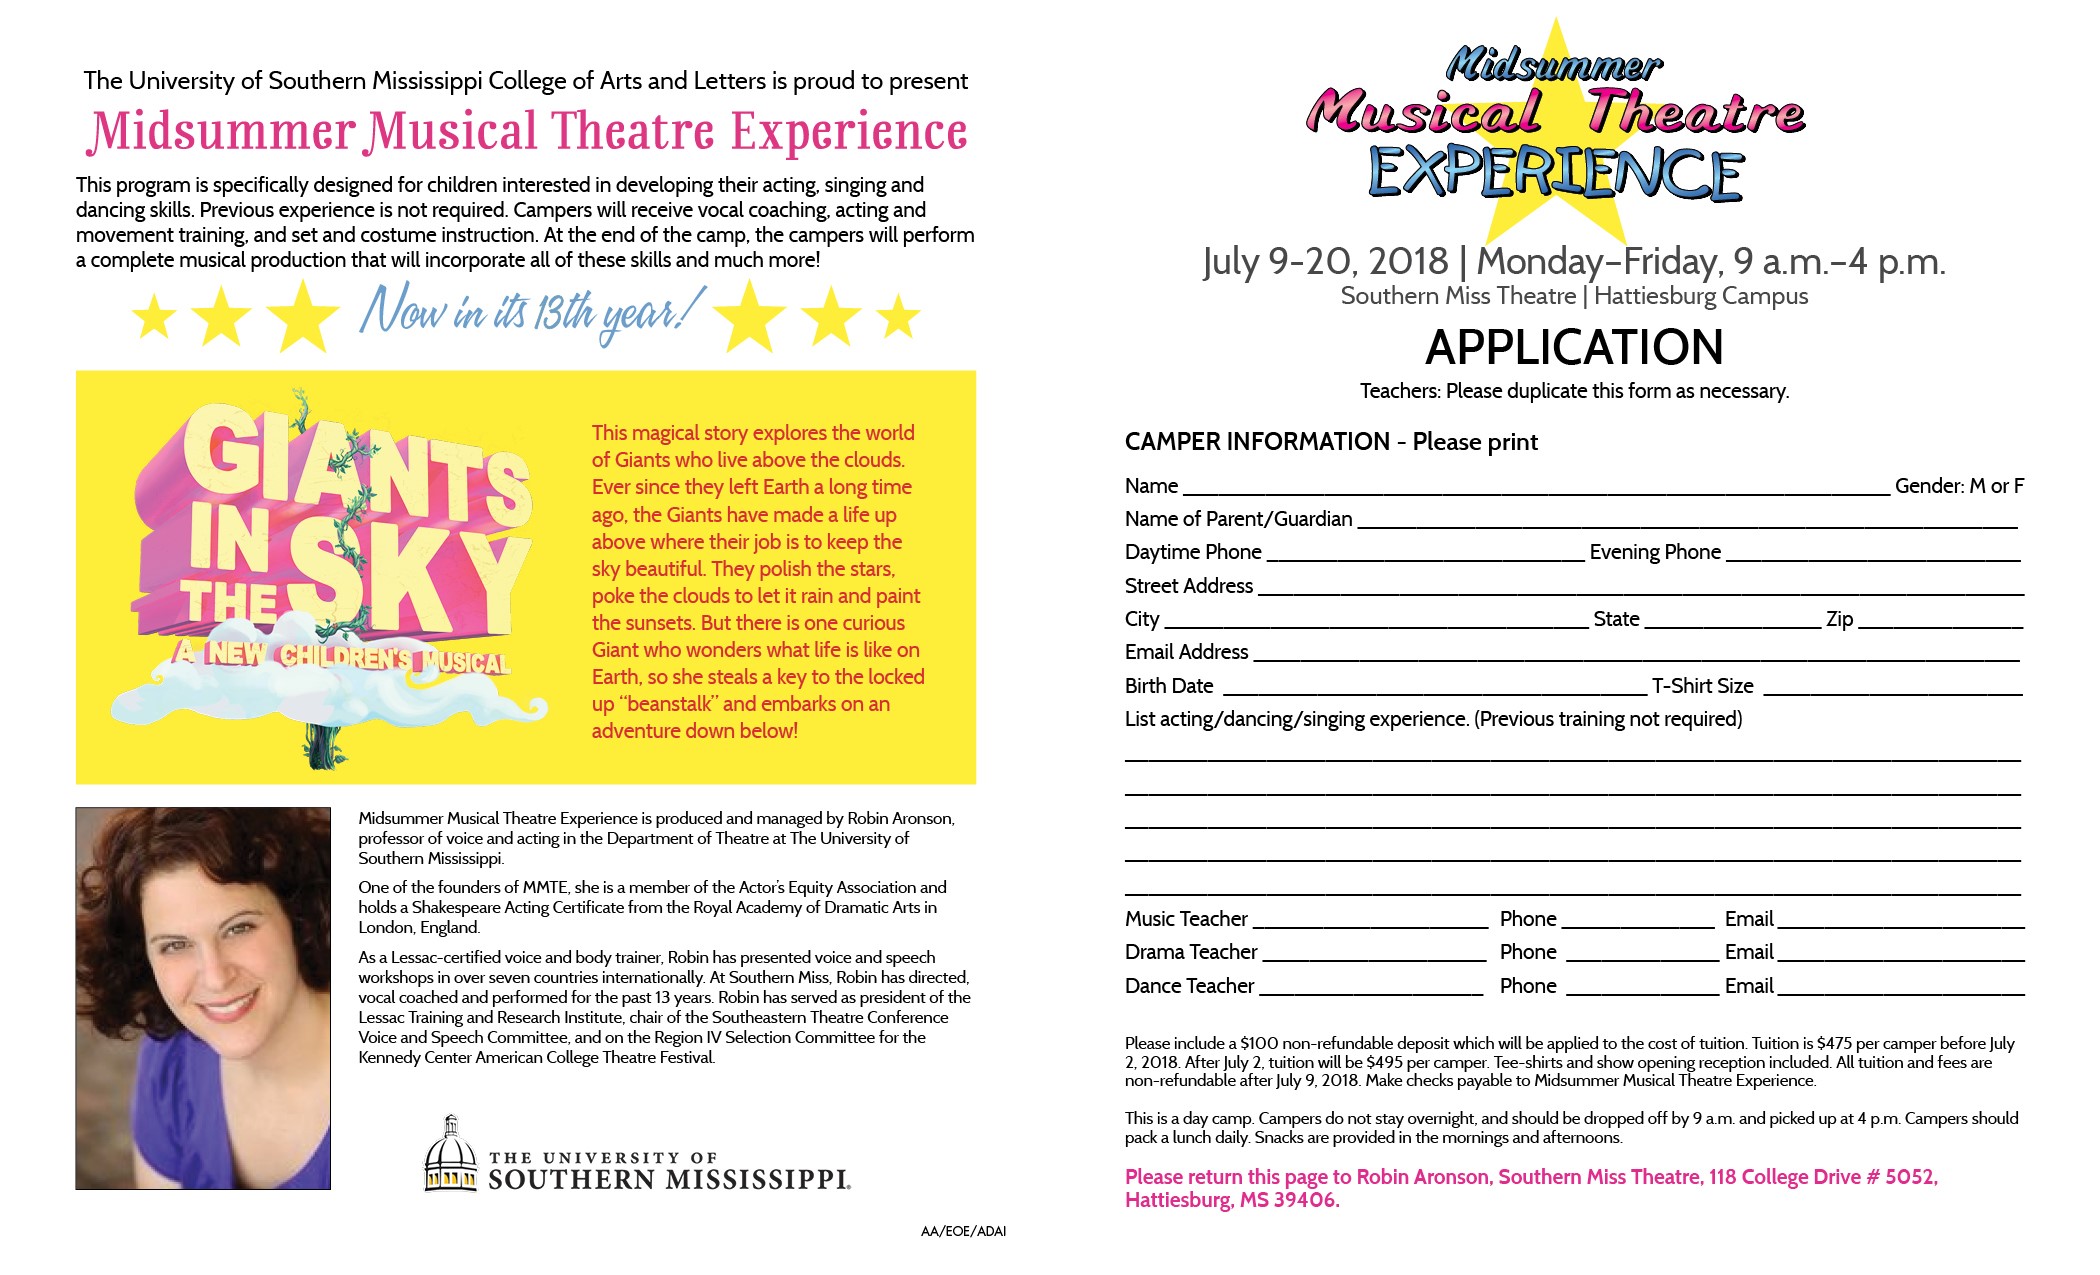 Midsummer Musical Theatre Experience application